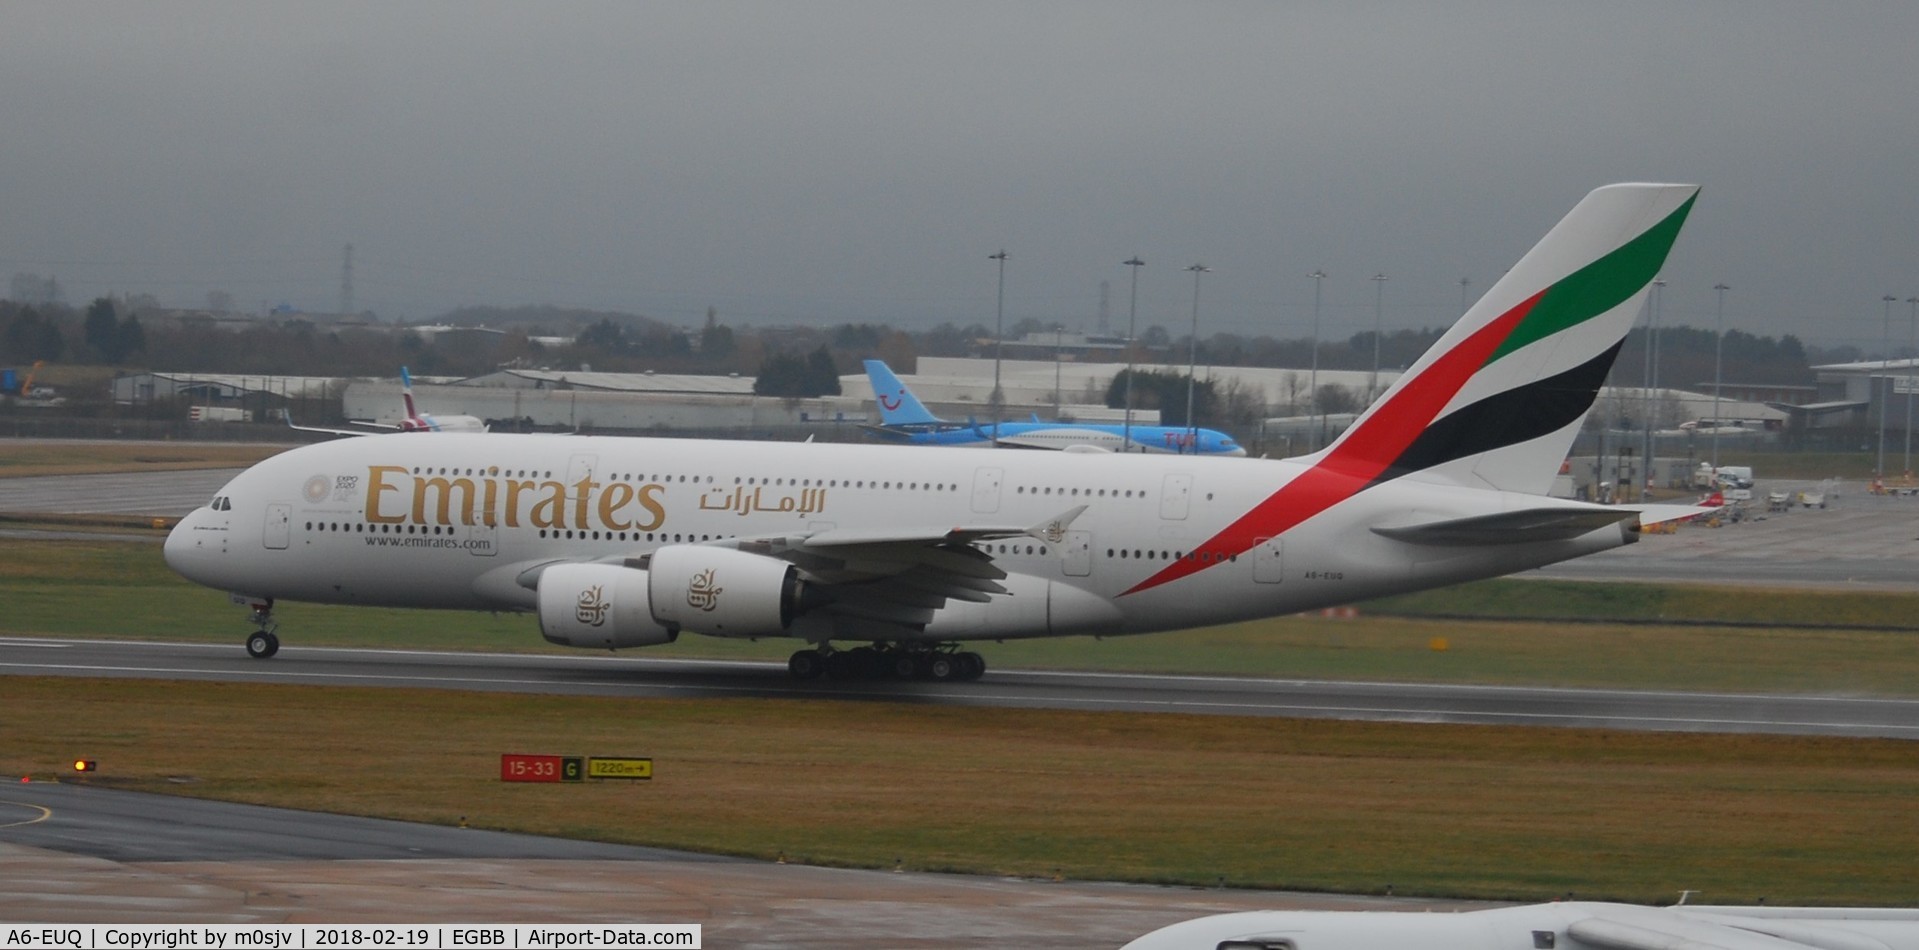 A6-EUQ, 2016 Airbus A380-842 C/N 229, Taken from Freeport Carpark